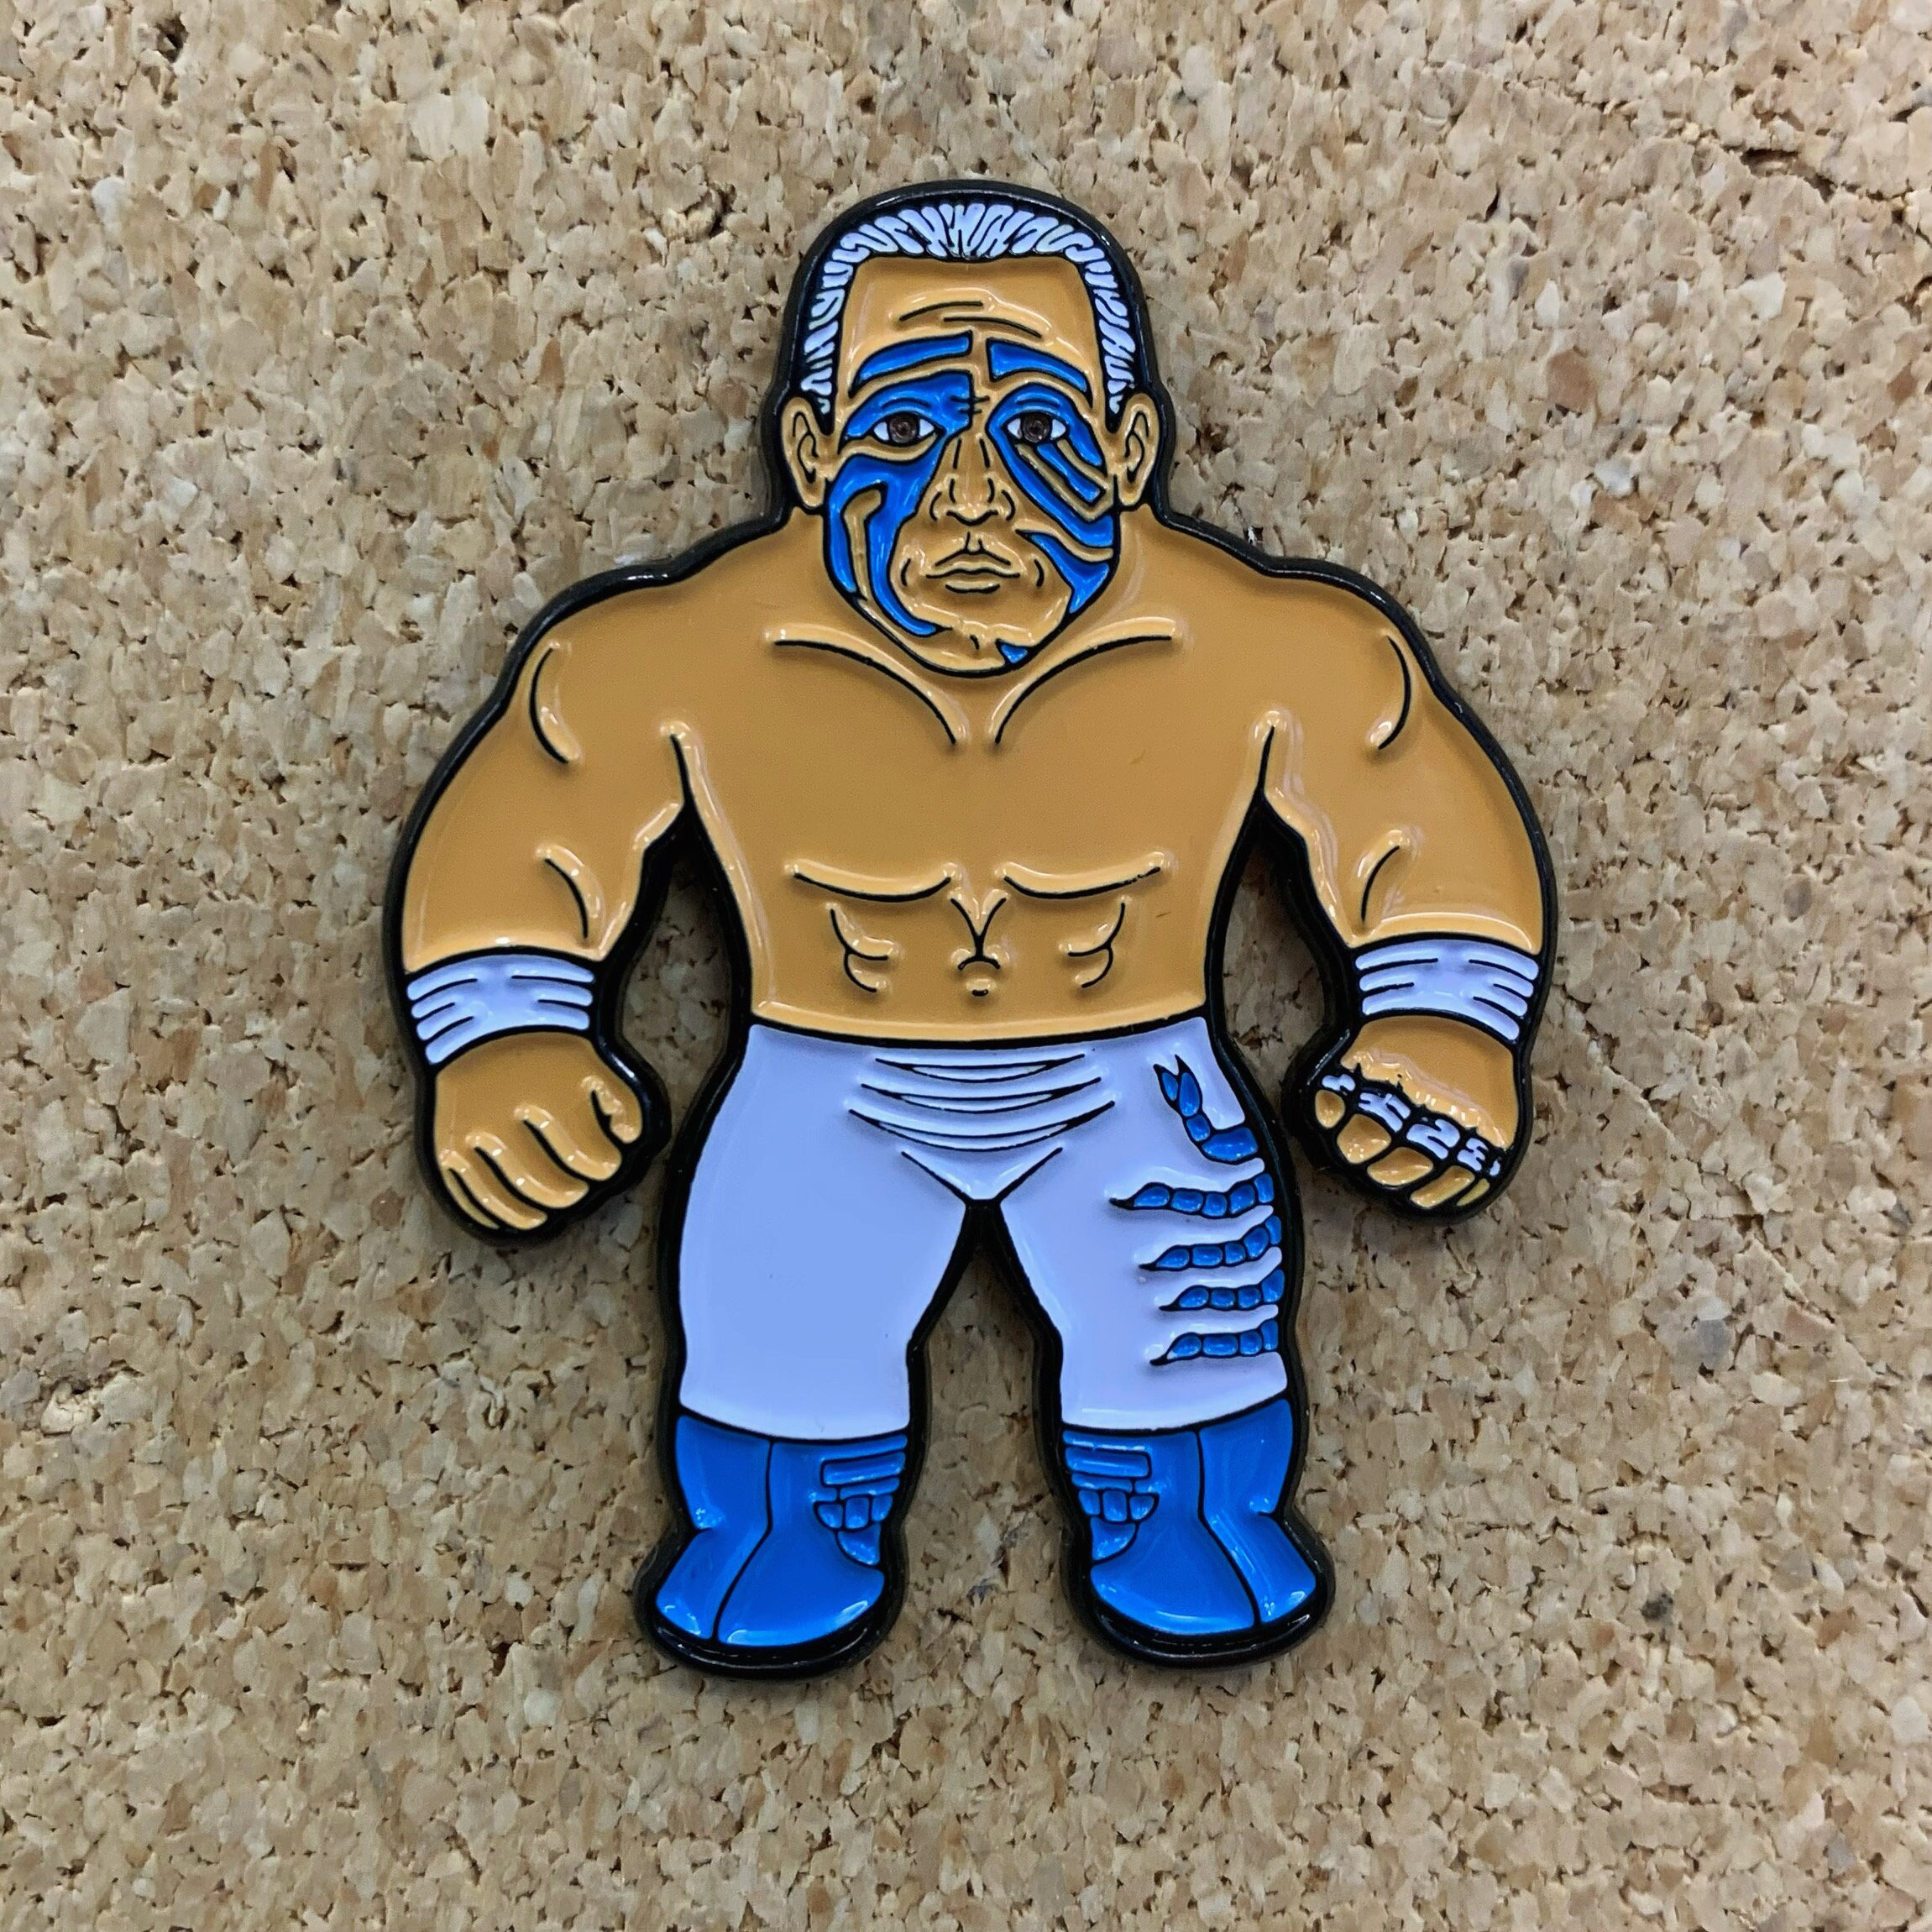 Wrestling Pins 1.25 or 1.75 inch pinback buttons pins badges Student reward  Wrestling theme Party favors